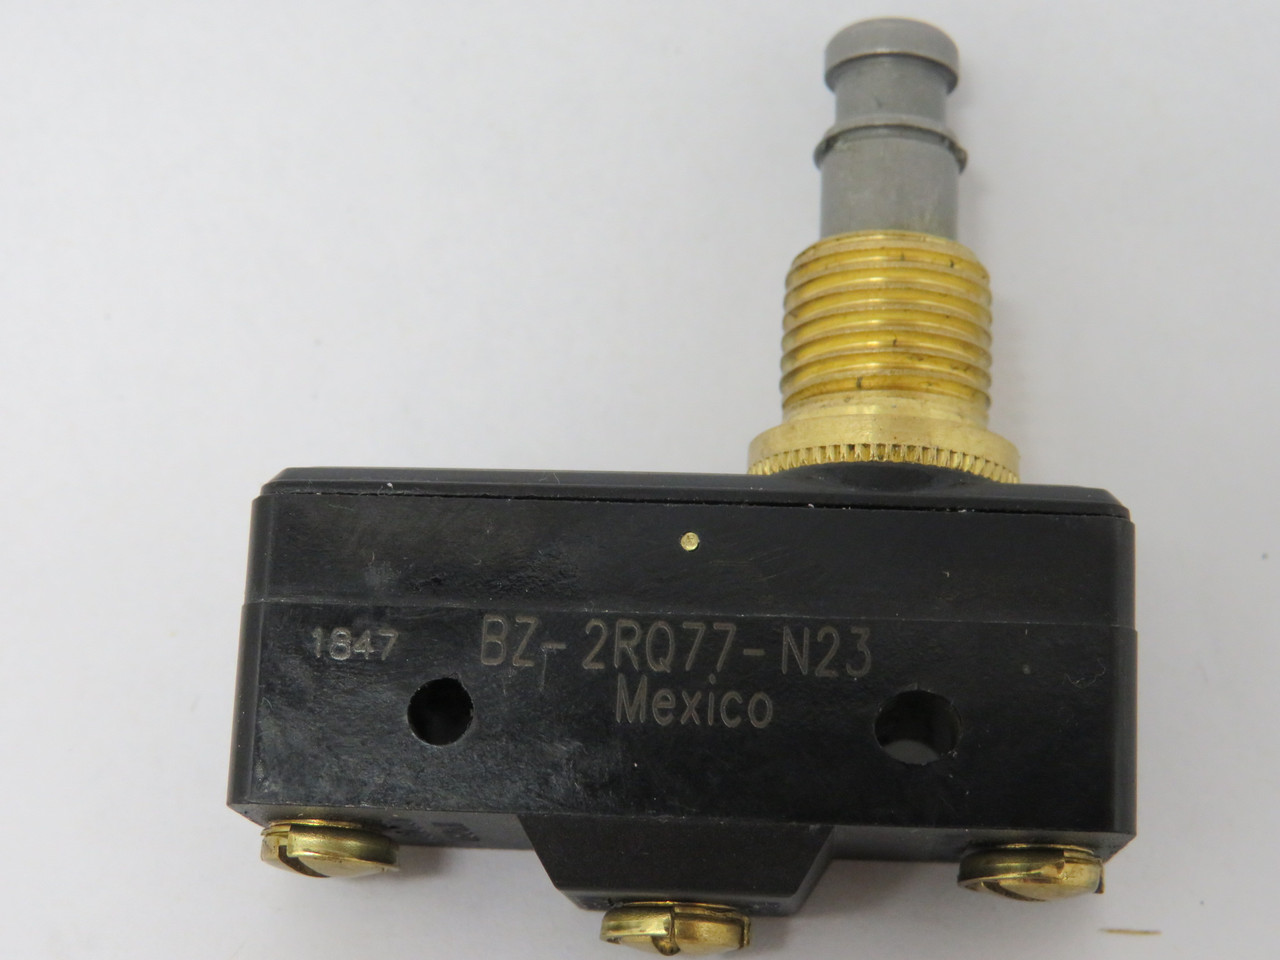 Microswitch BZ-2RQ77-N23 Push Button Limit Switch 15A@125/250/480VAC USED